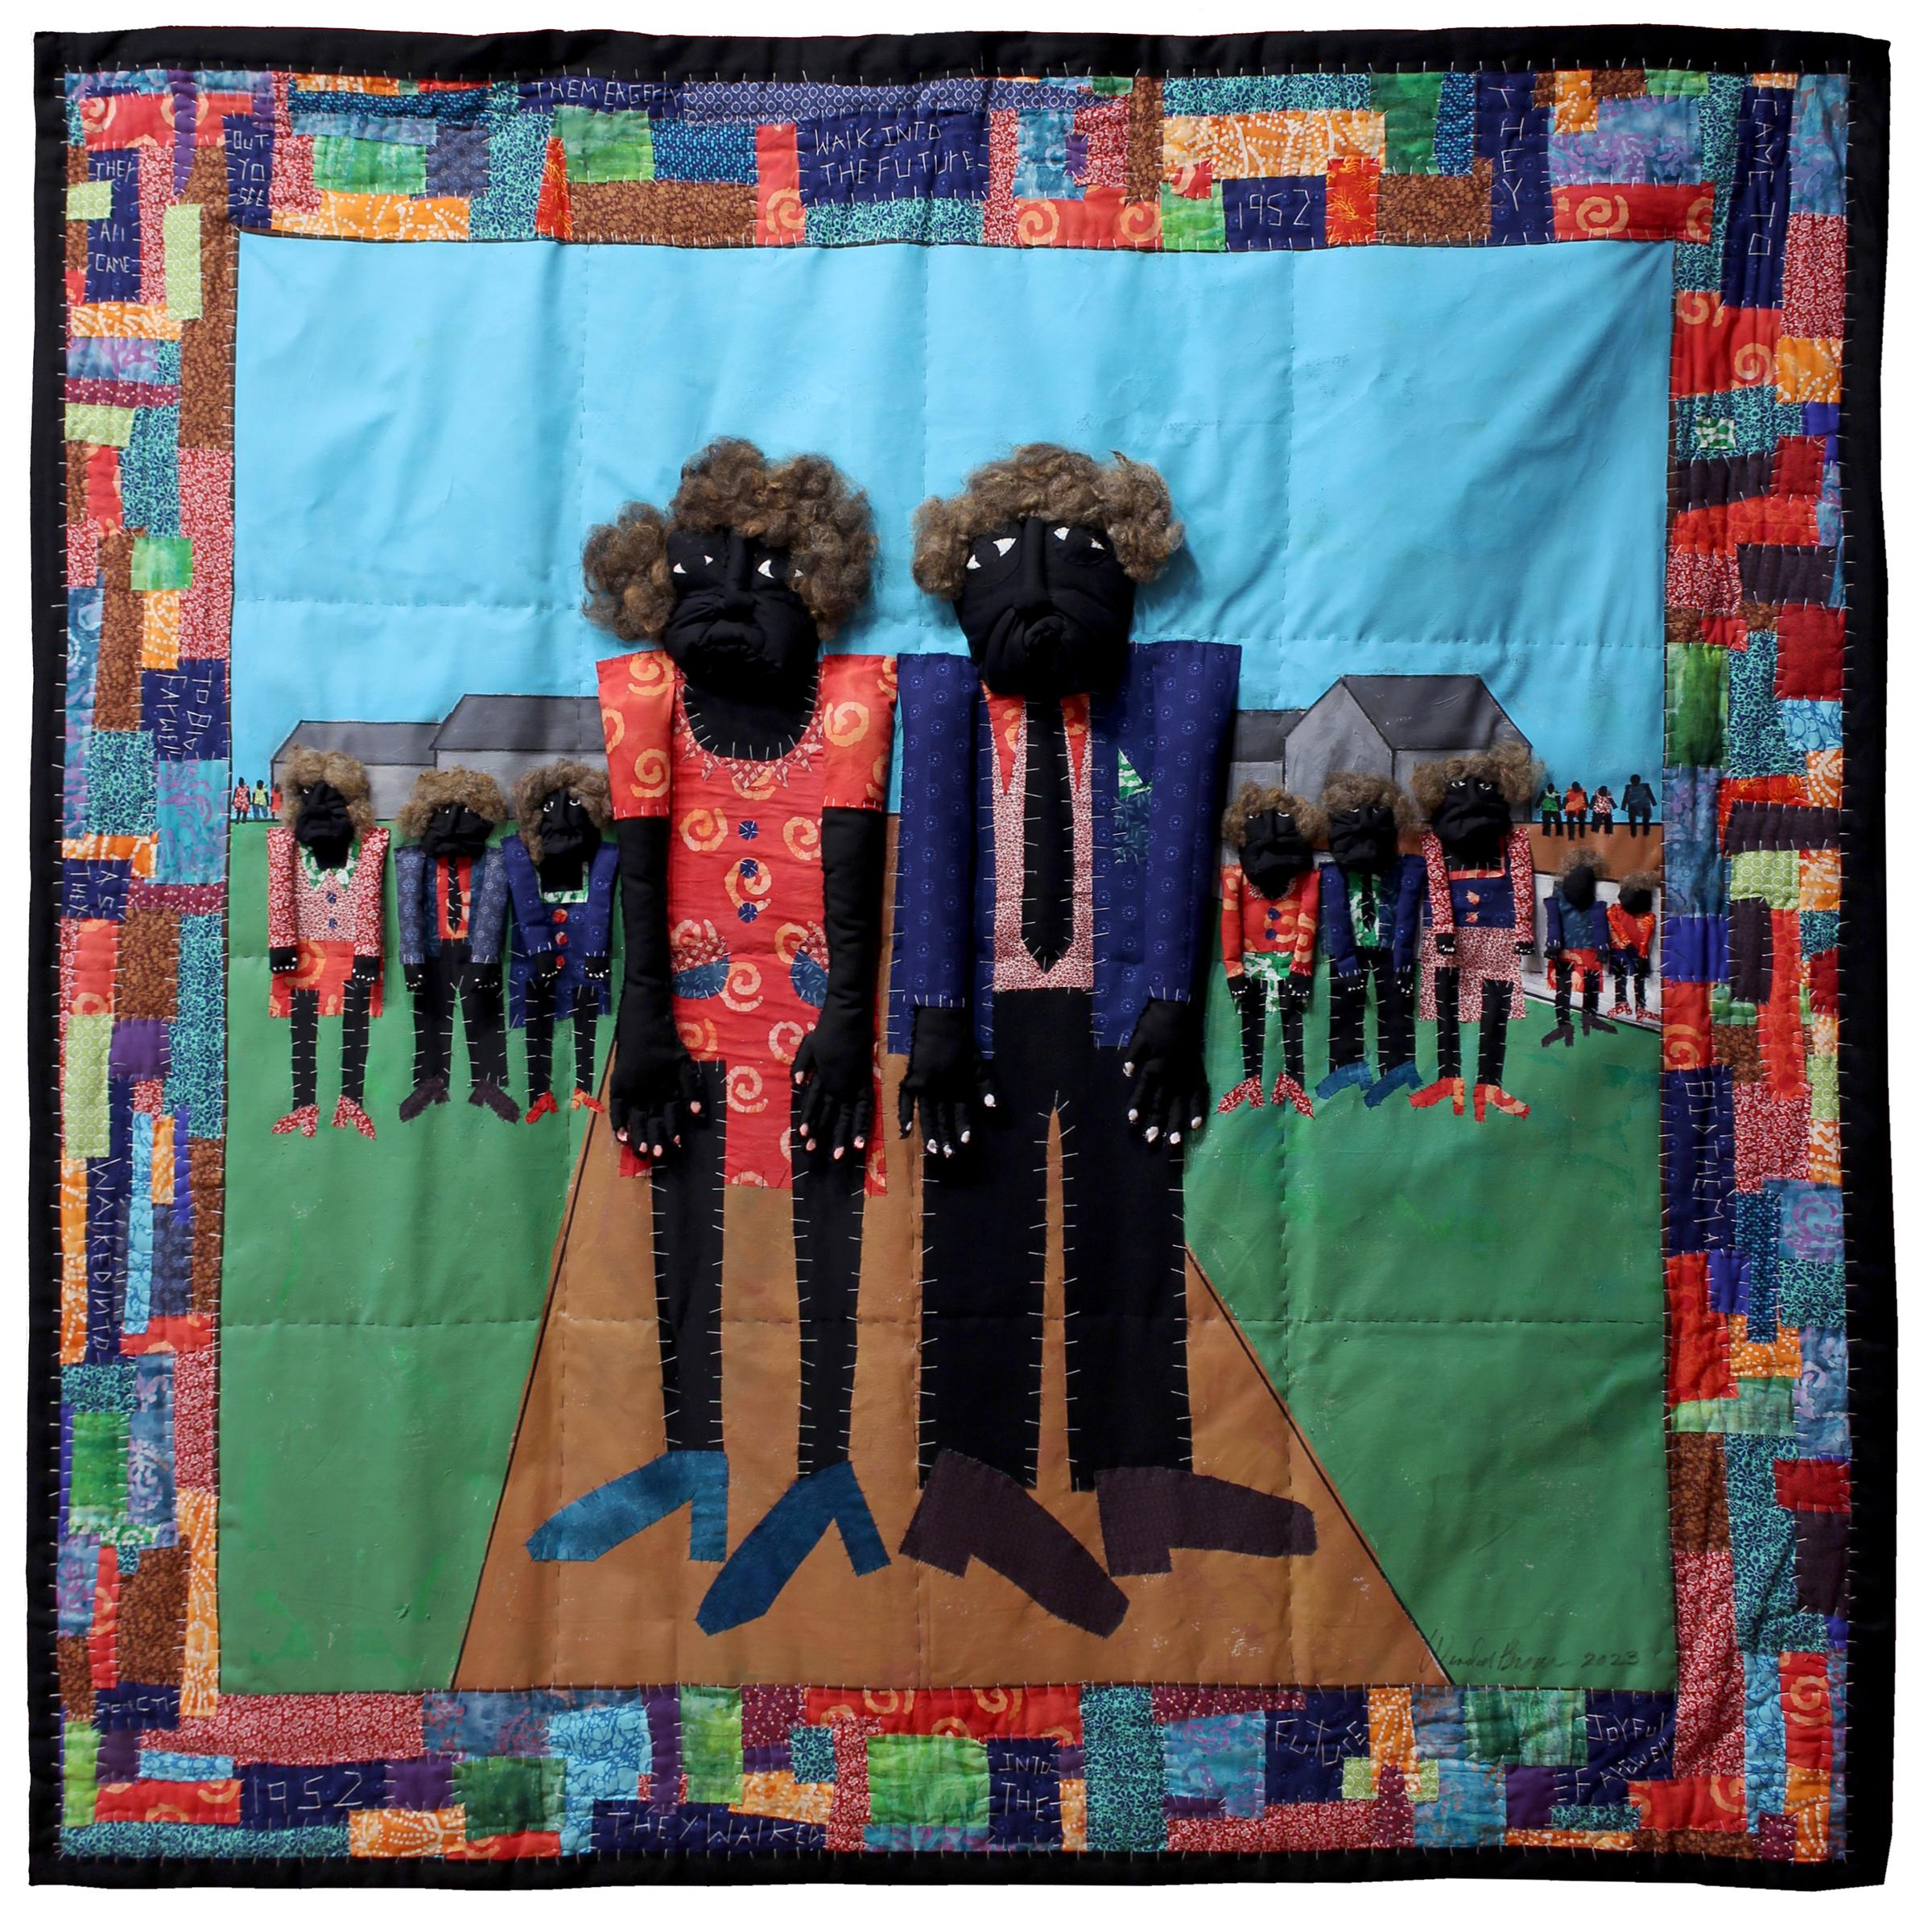 Wendell George Brown Figurative Sculpture - 'The Joyous Farewell into the Future' - quilt - Negro Spirituals - figures